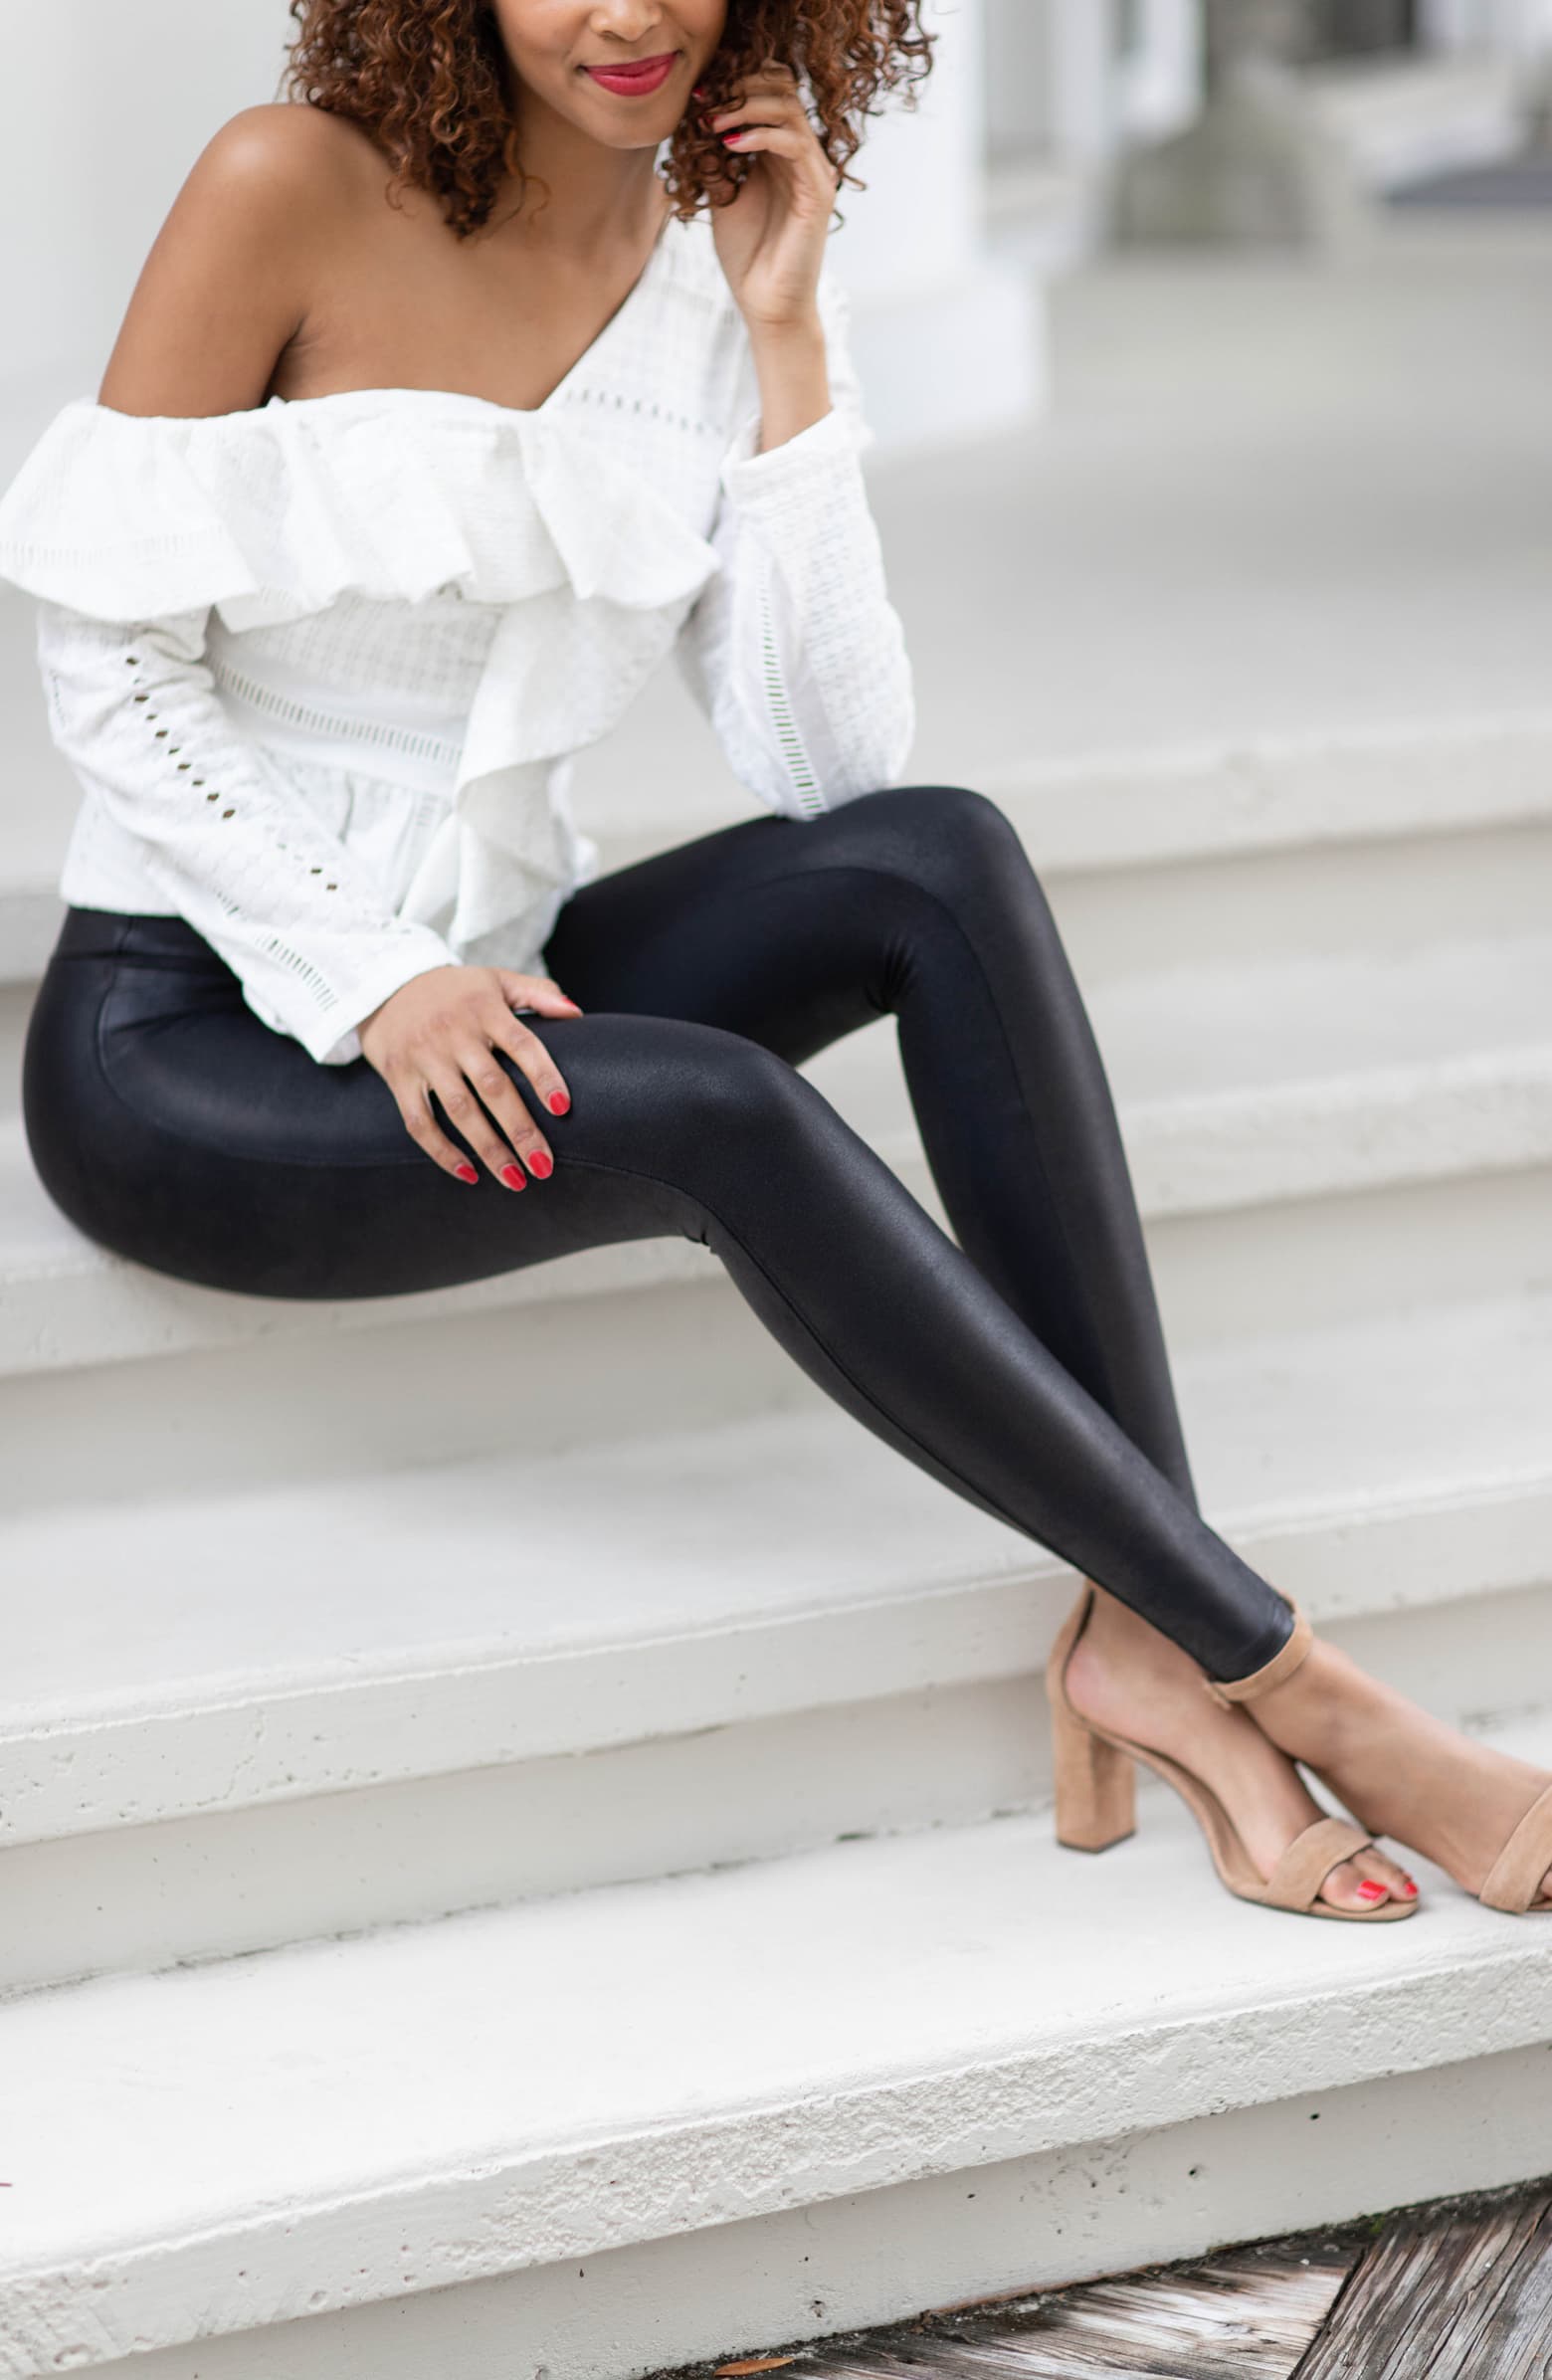 The Super Flattering Spanx Leggings You Should Buy Immediately At  Nordstrom's Anniversary Sale While They're Still In Stock! - SHEfinds